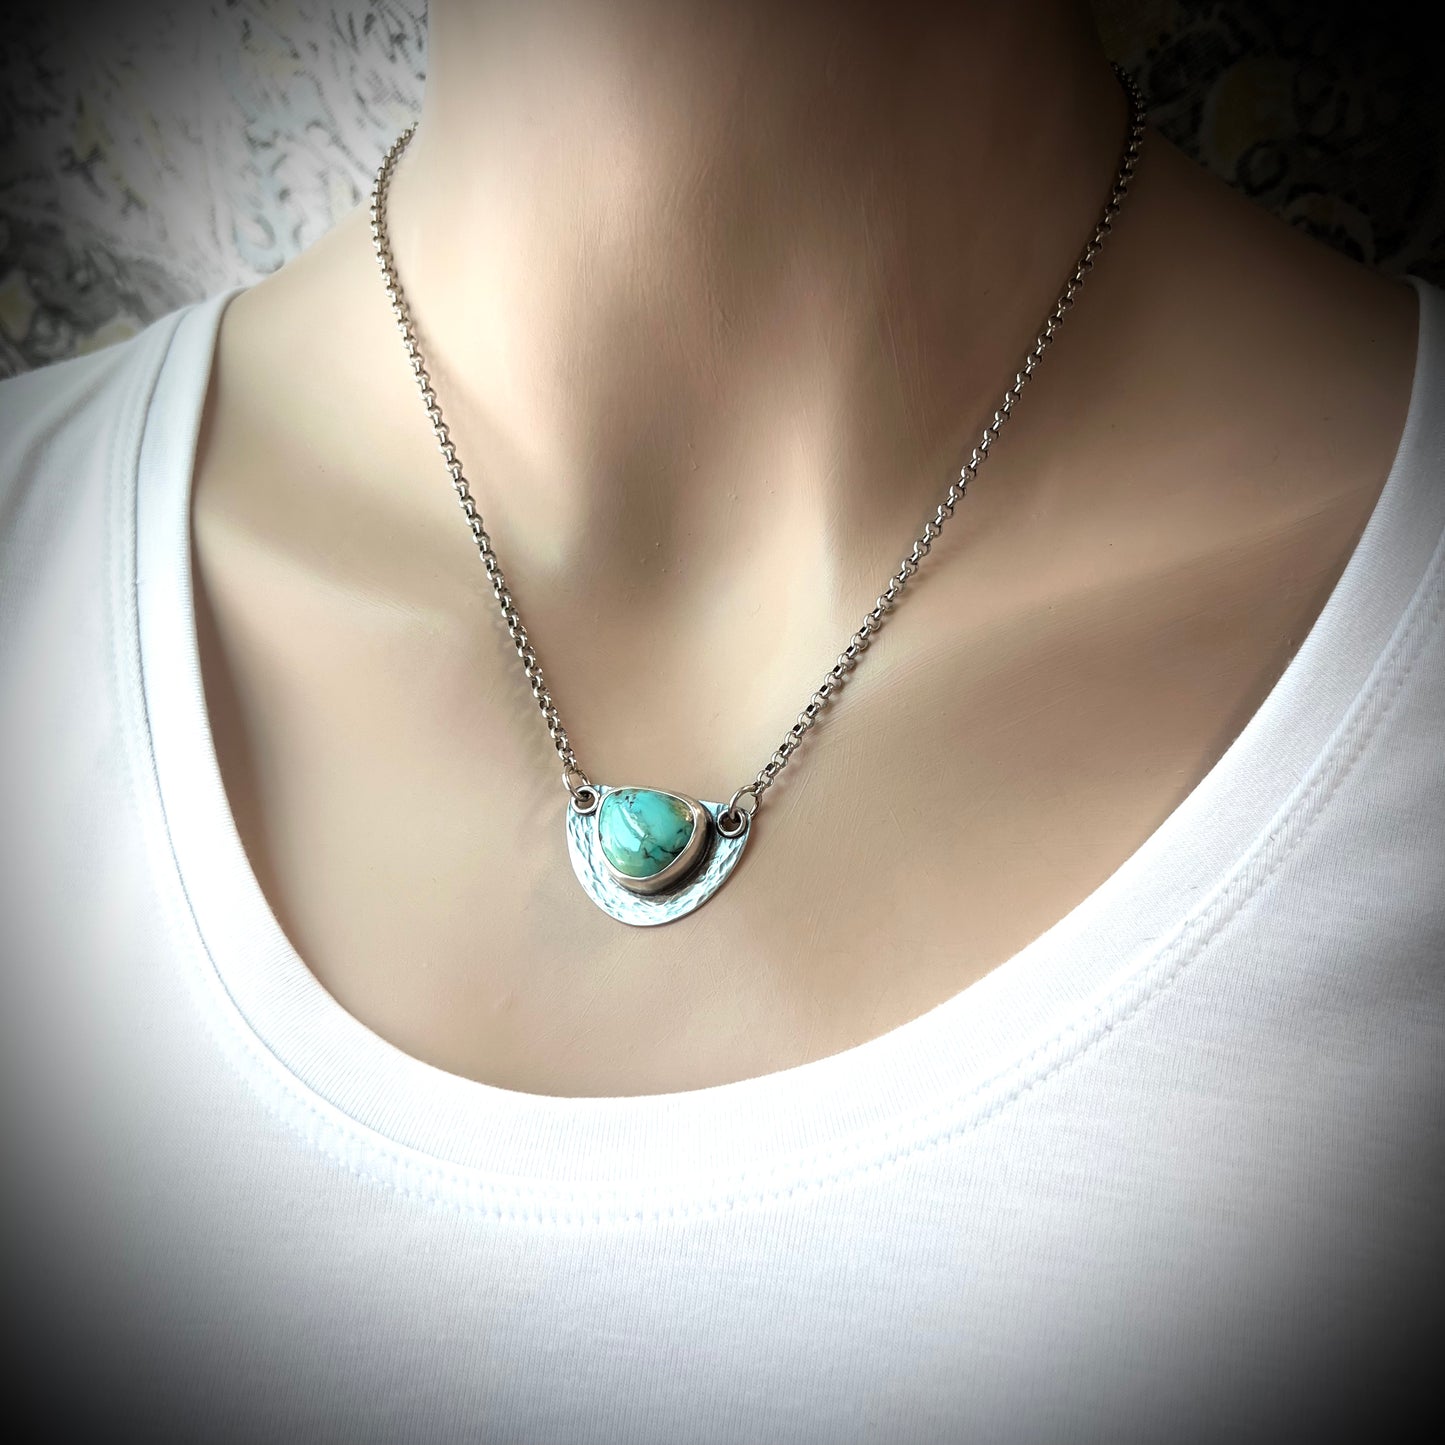 Sterling Silver Turquoise Half Moon Pendant - One-of-a-Kind Turquoise Semicircle Necklace